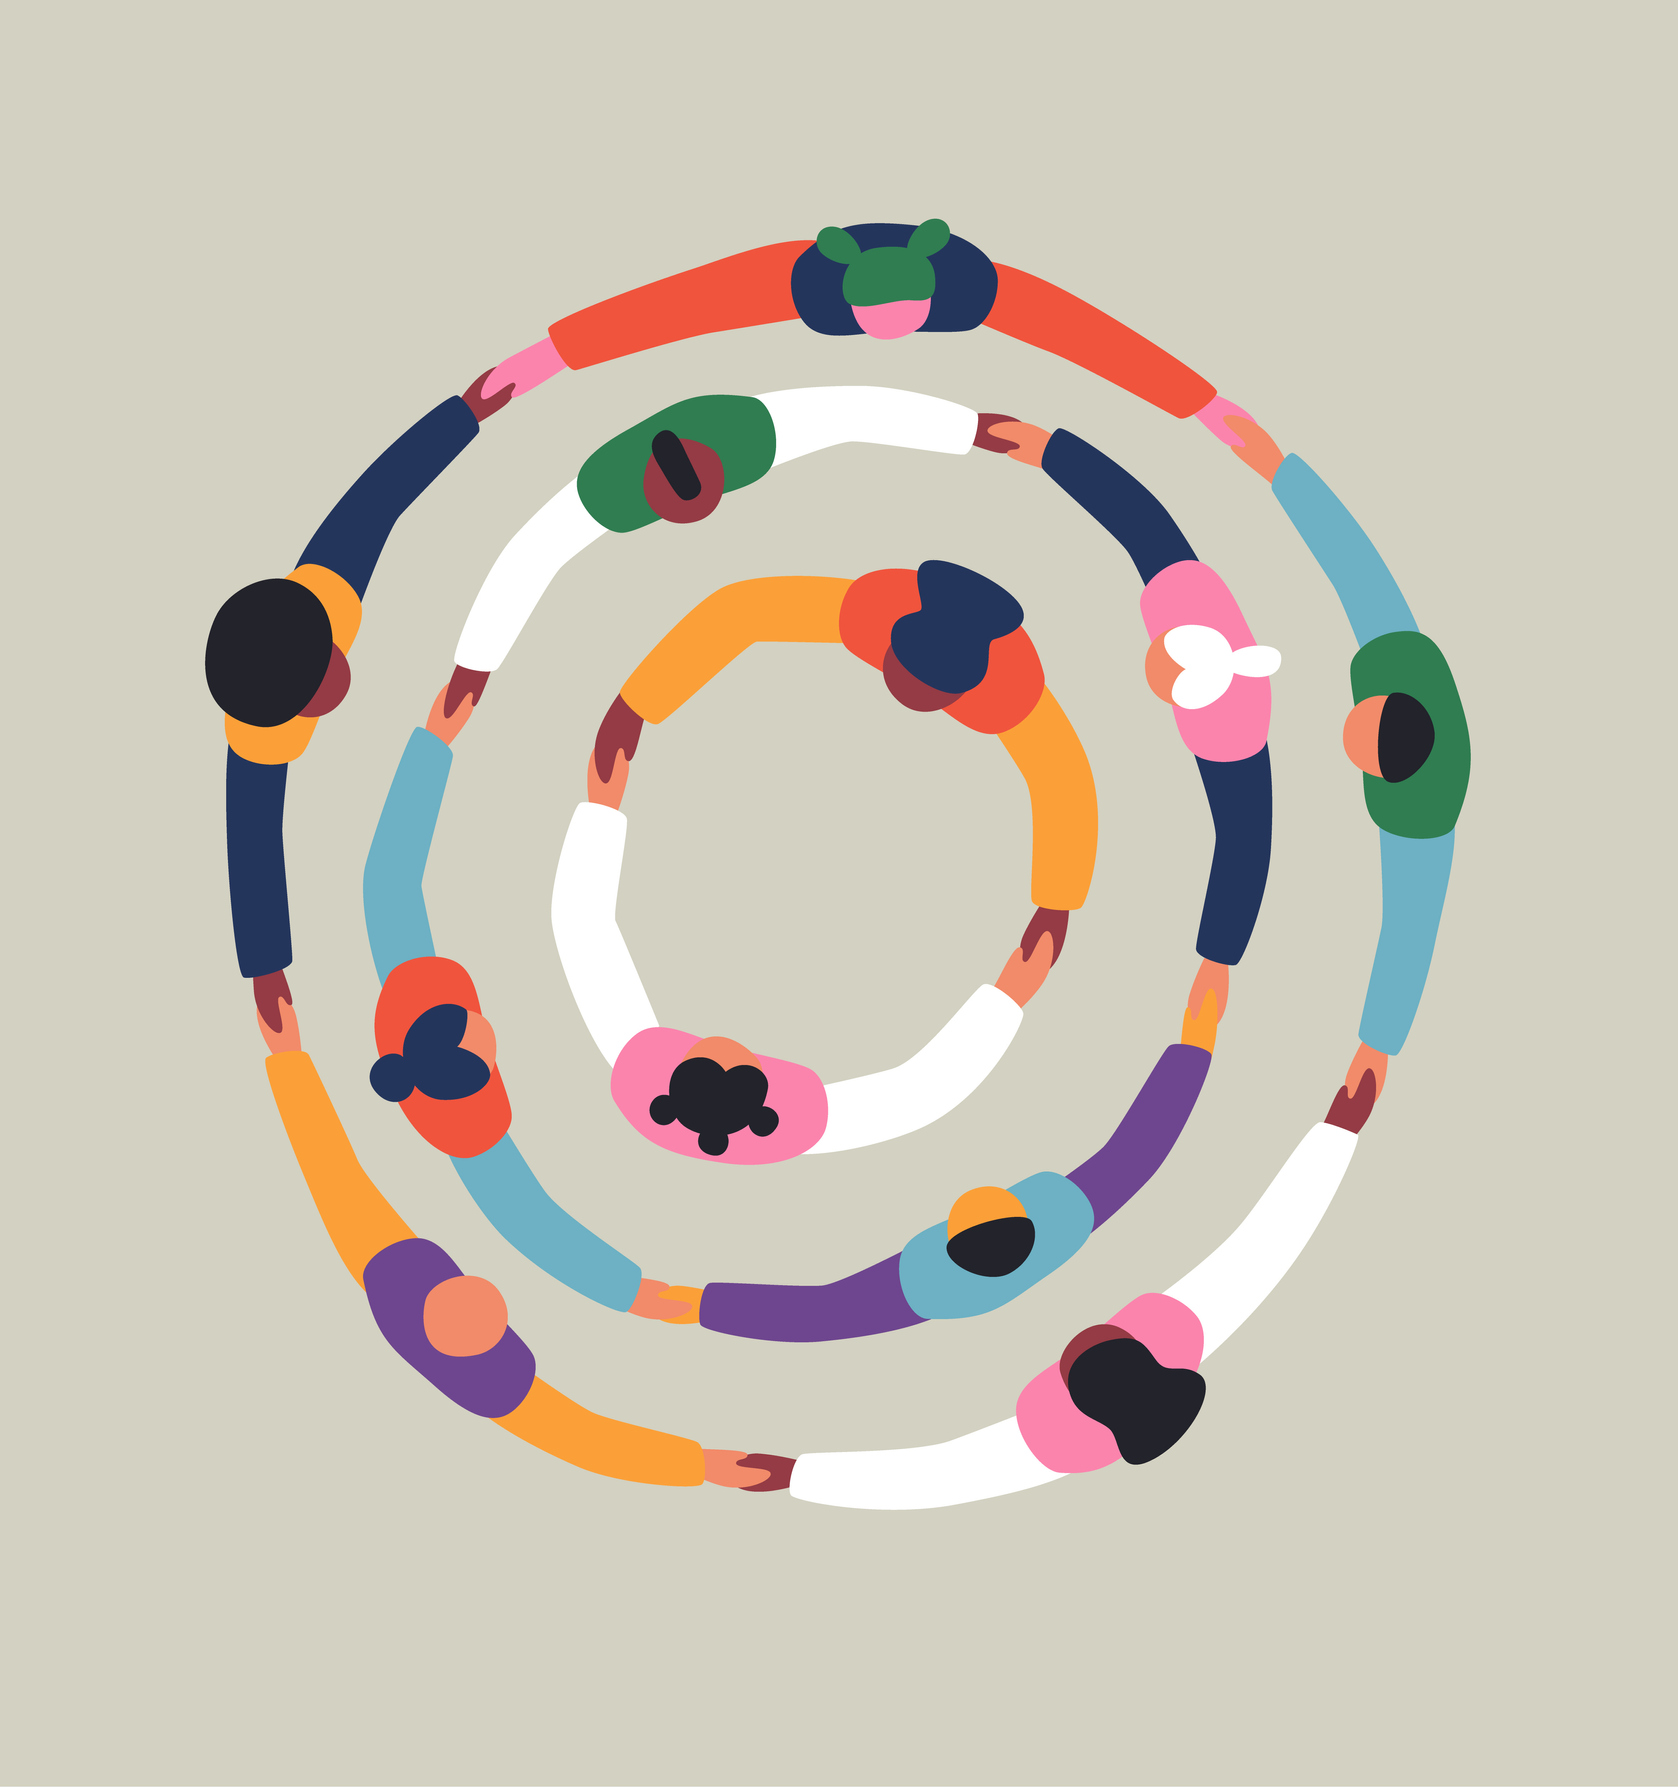 Big group of people holding hands together making round circle shape. Colorful diverse friend team concept, united community or social cooperation cartoon on isolated background.